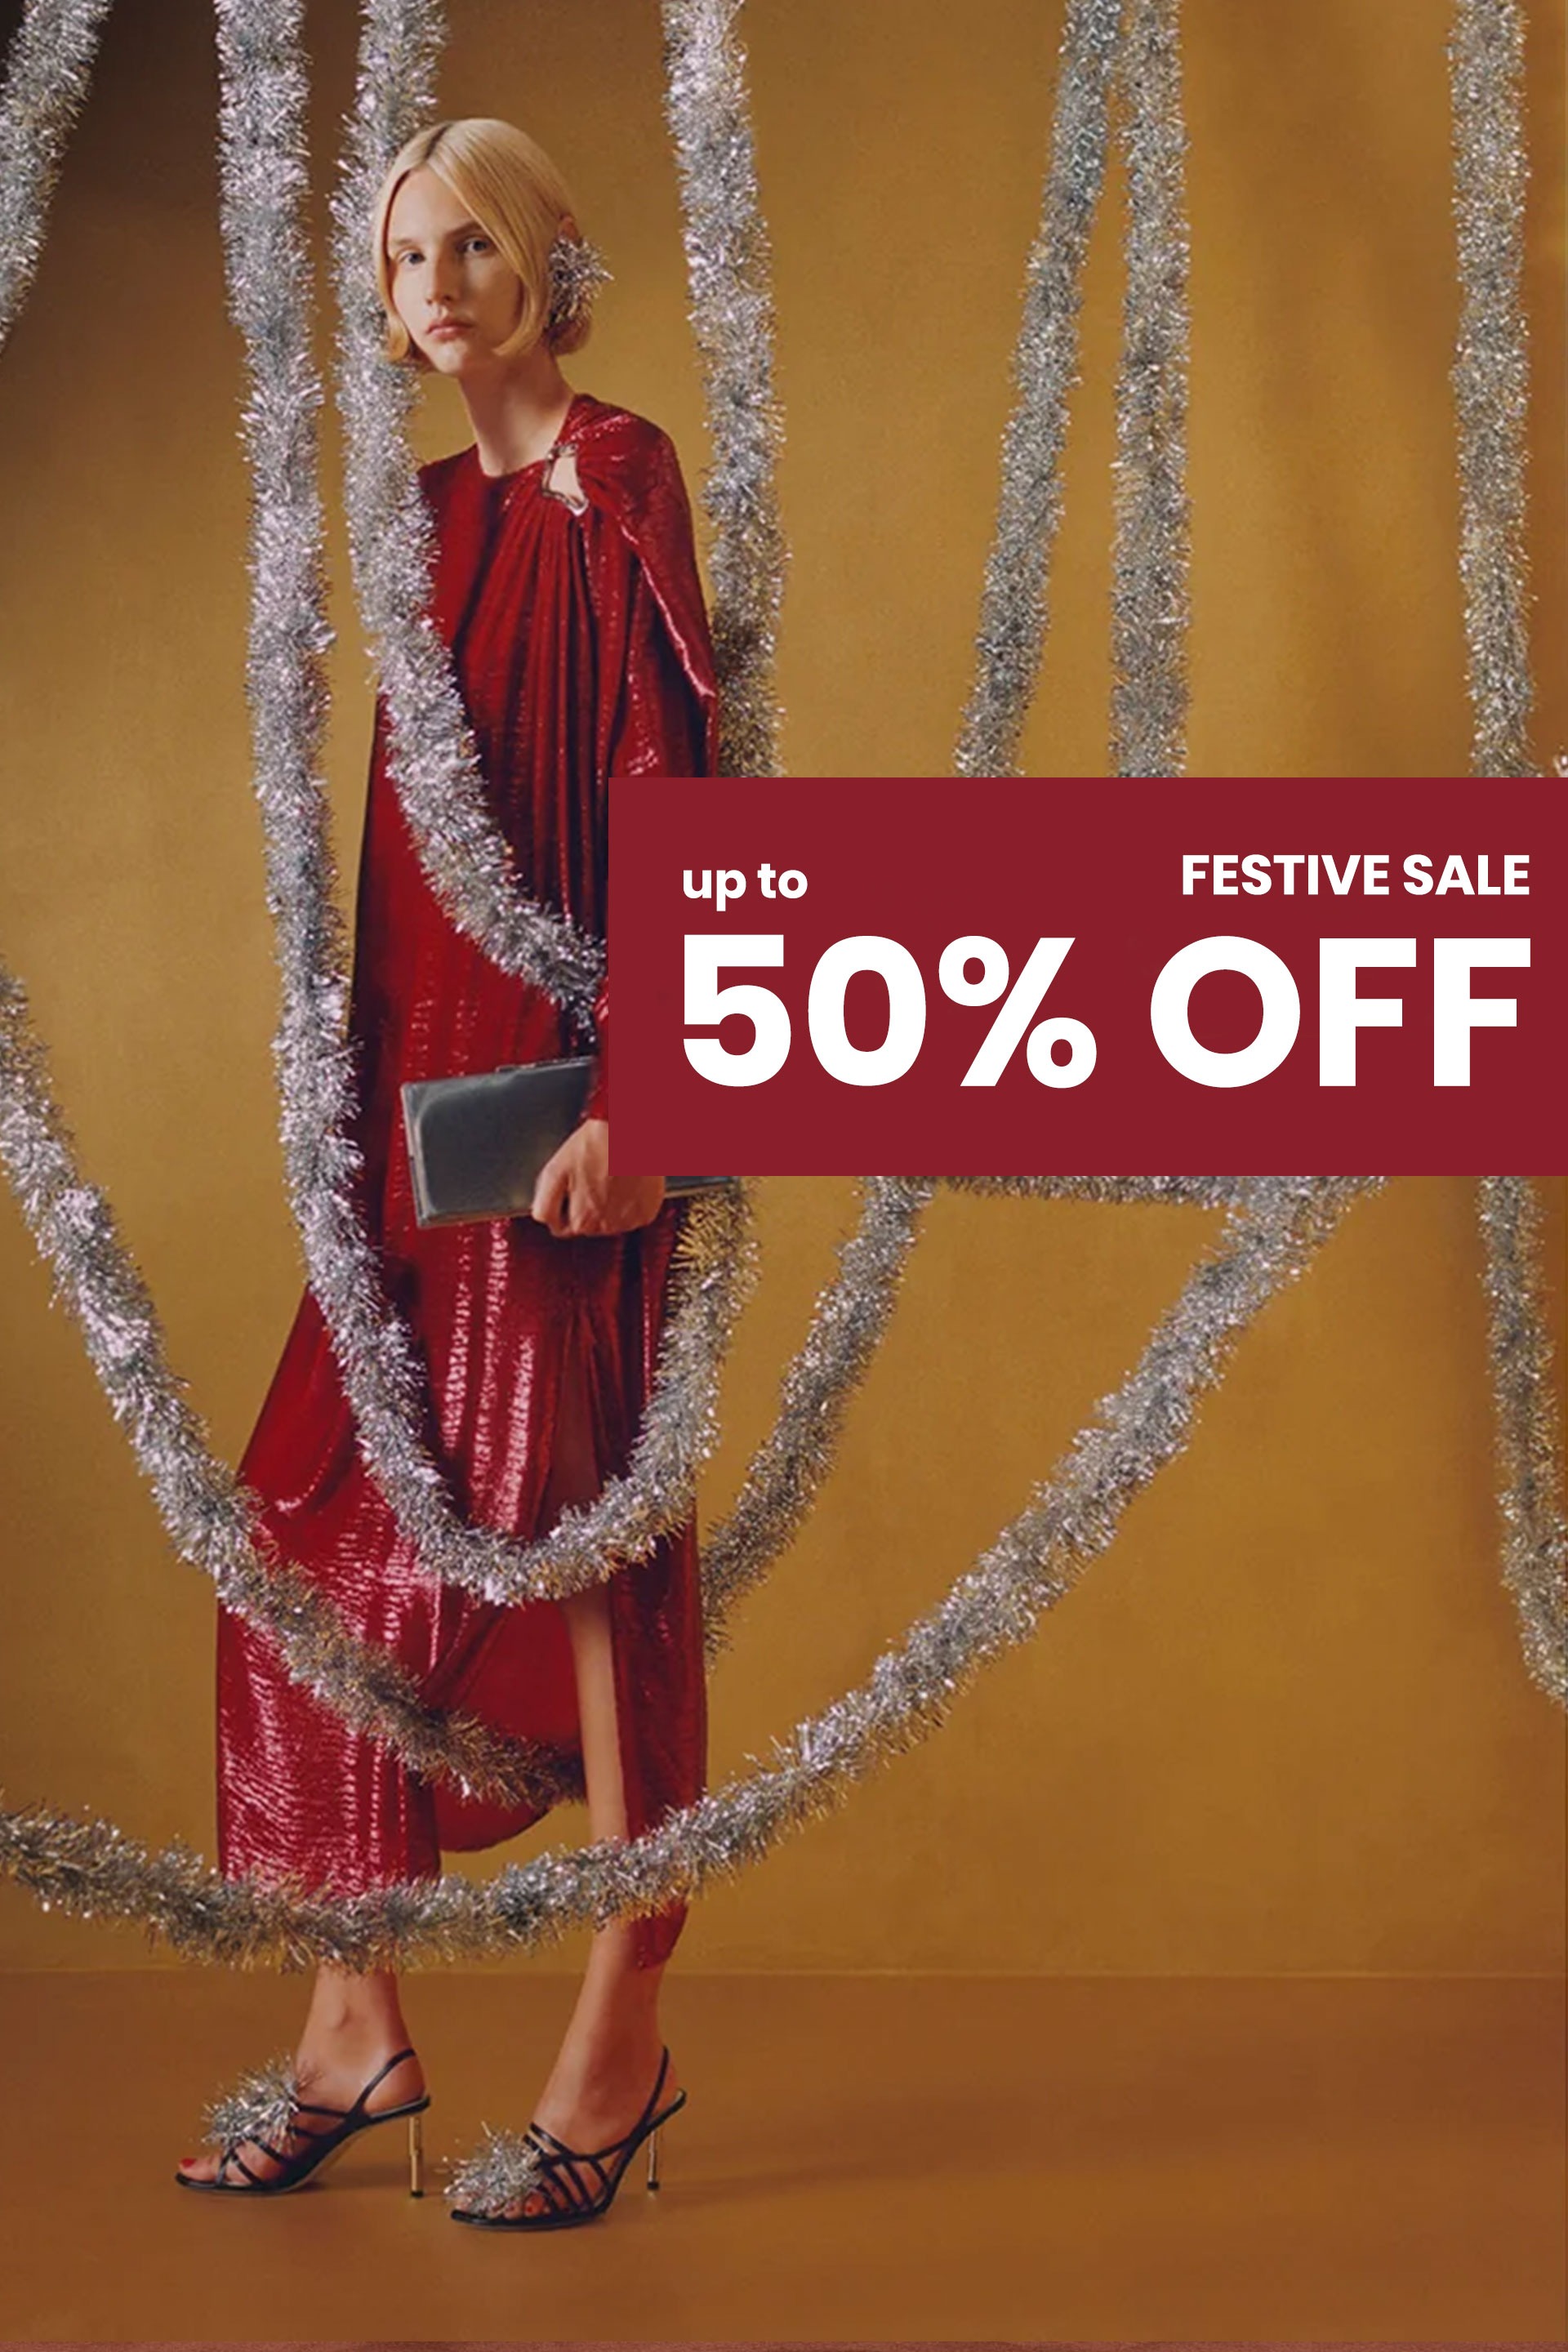 Festive sale Sale: UP TO 50% OFF